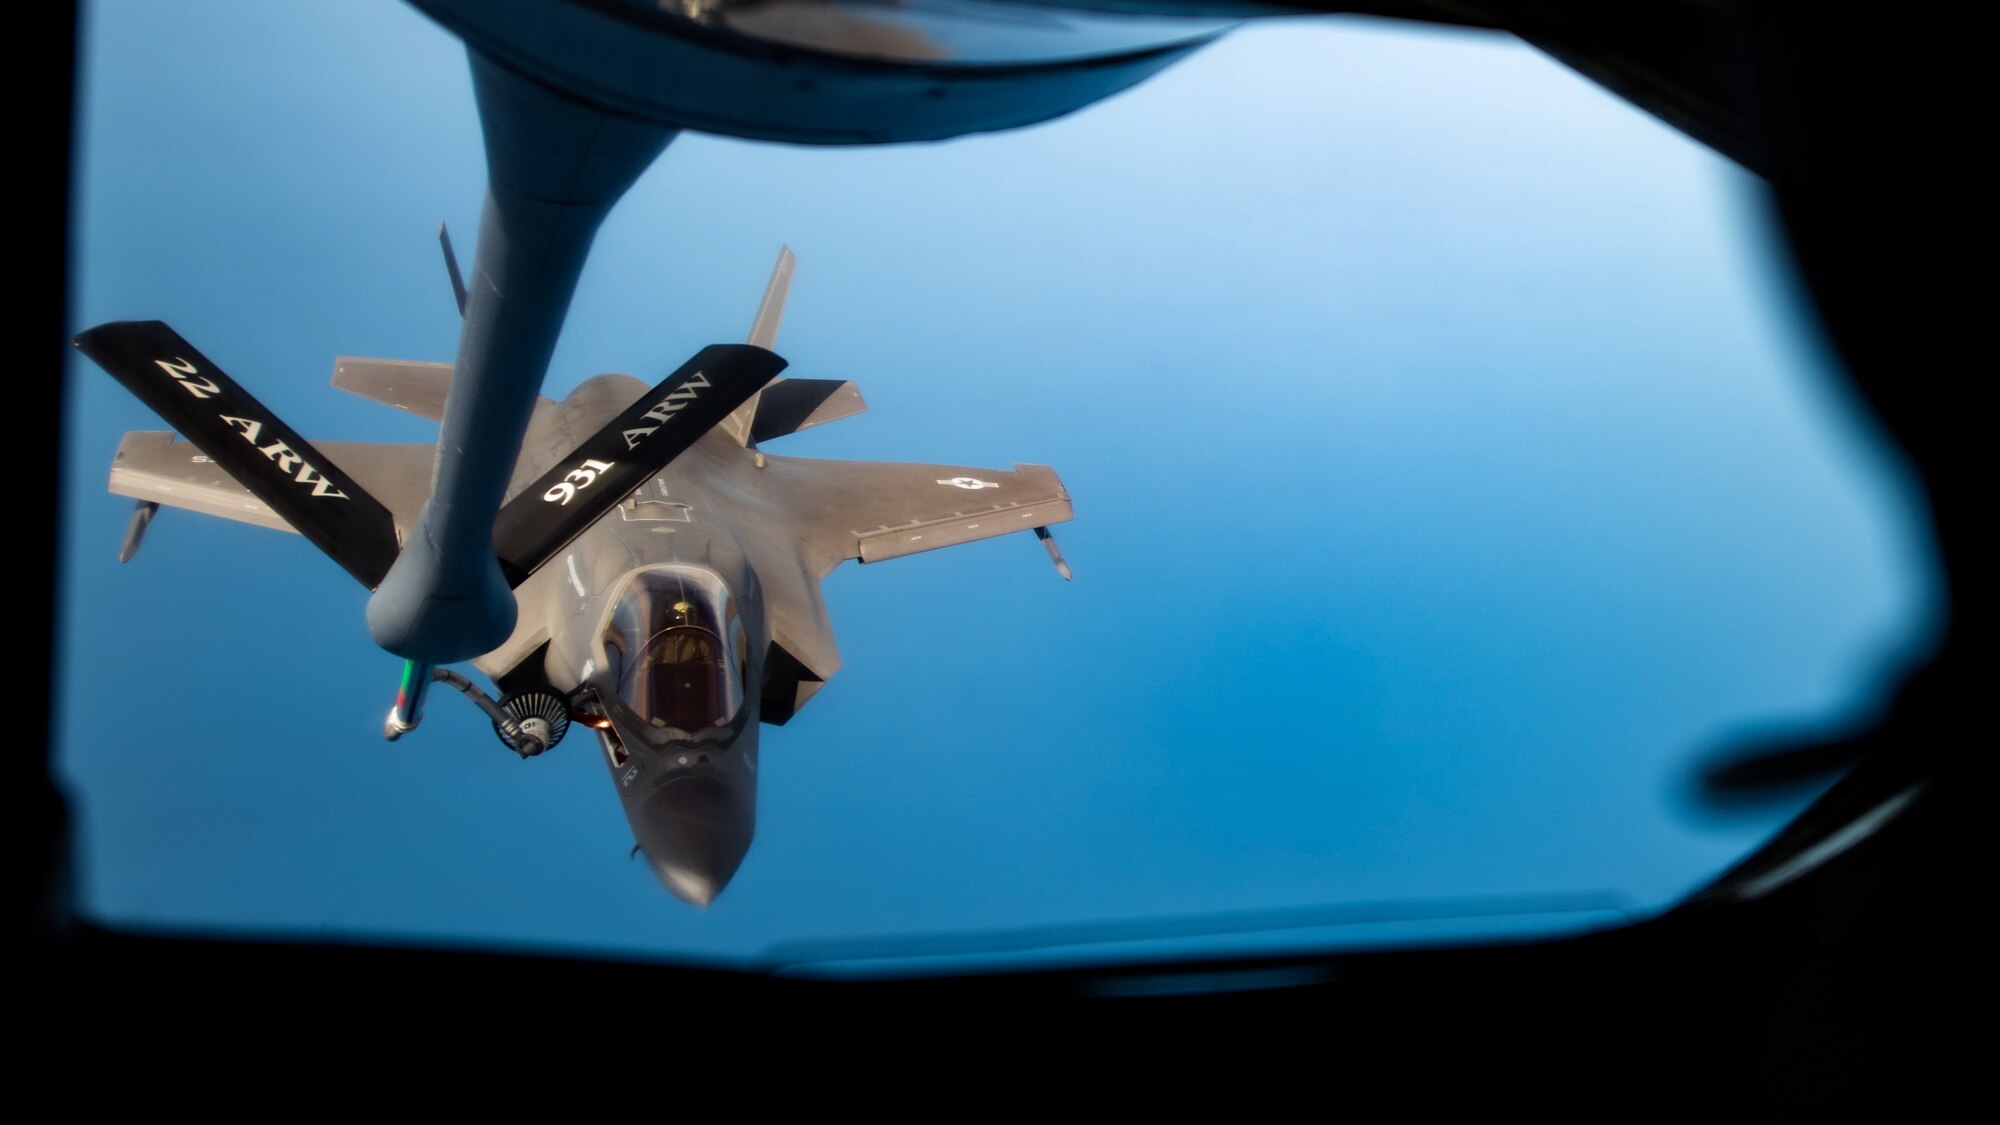 A U.S. Marine Corps F-35B Lightning II, assigned to Marine Fighter Attack Squadron 121, and U.S. Air Force KC-135 Stratotanker practice quick-maneuver, in-flight refueling over the Pacific Ocean, Sept. 9, 2022. The U.S. can operate from the sanctuary of bases across the Indo-Pacific region, increasing interoperability and lethality. (U.S. Air Force photo by Senior Airman Gary Hilton)